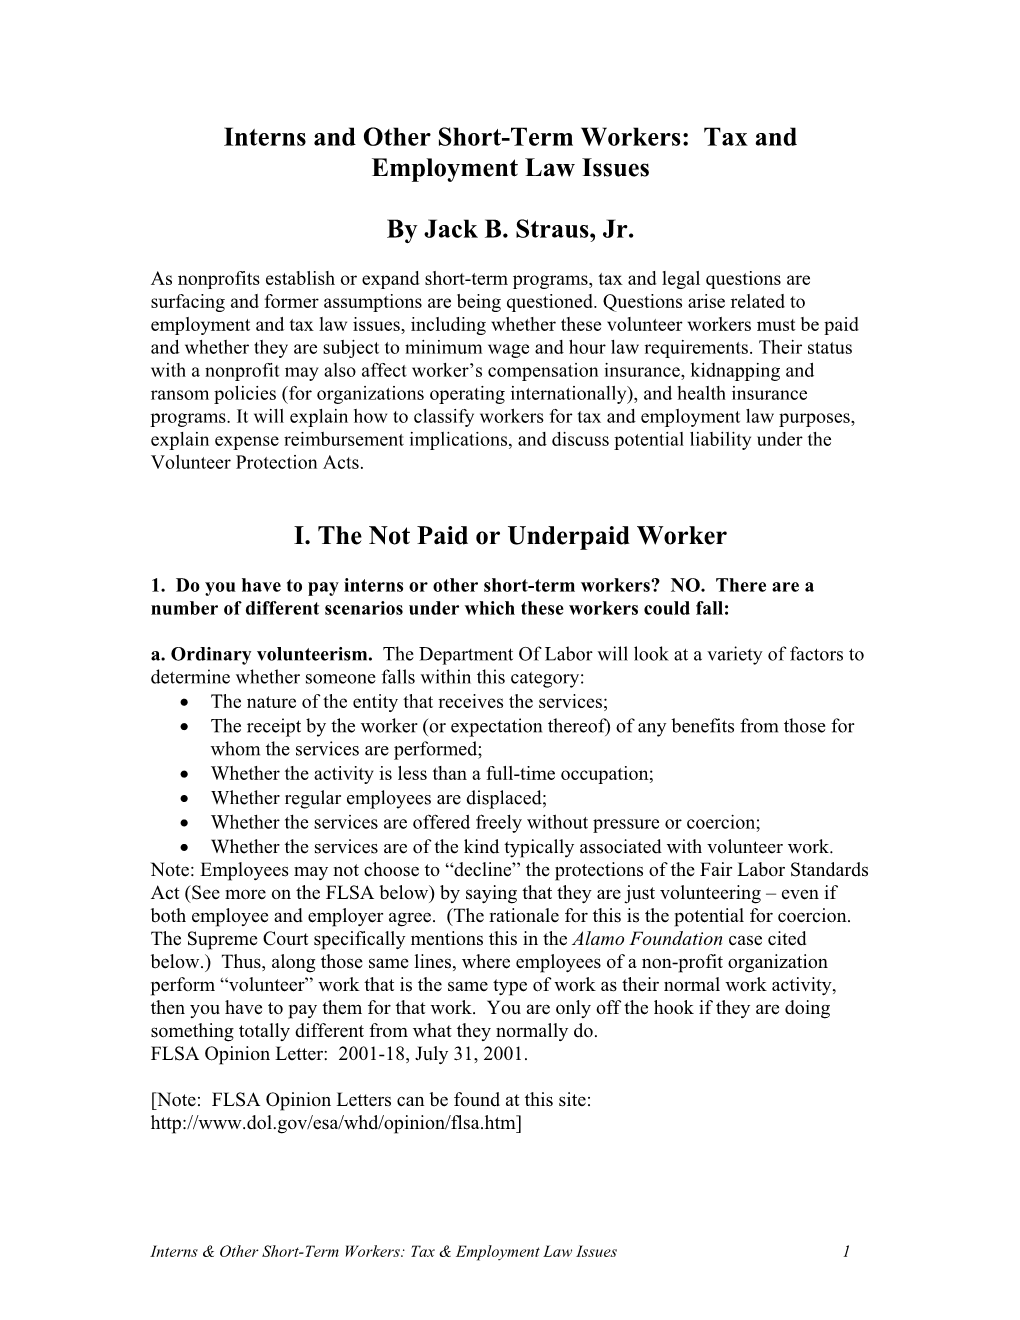 Interns & Other Short-Term Workers: Tax & Employment